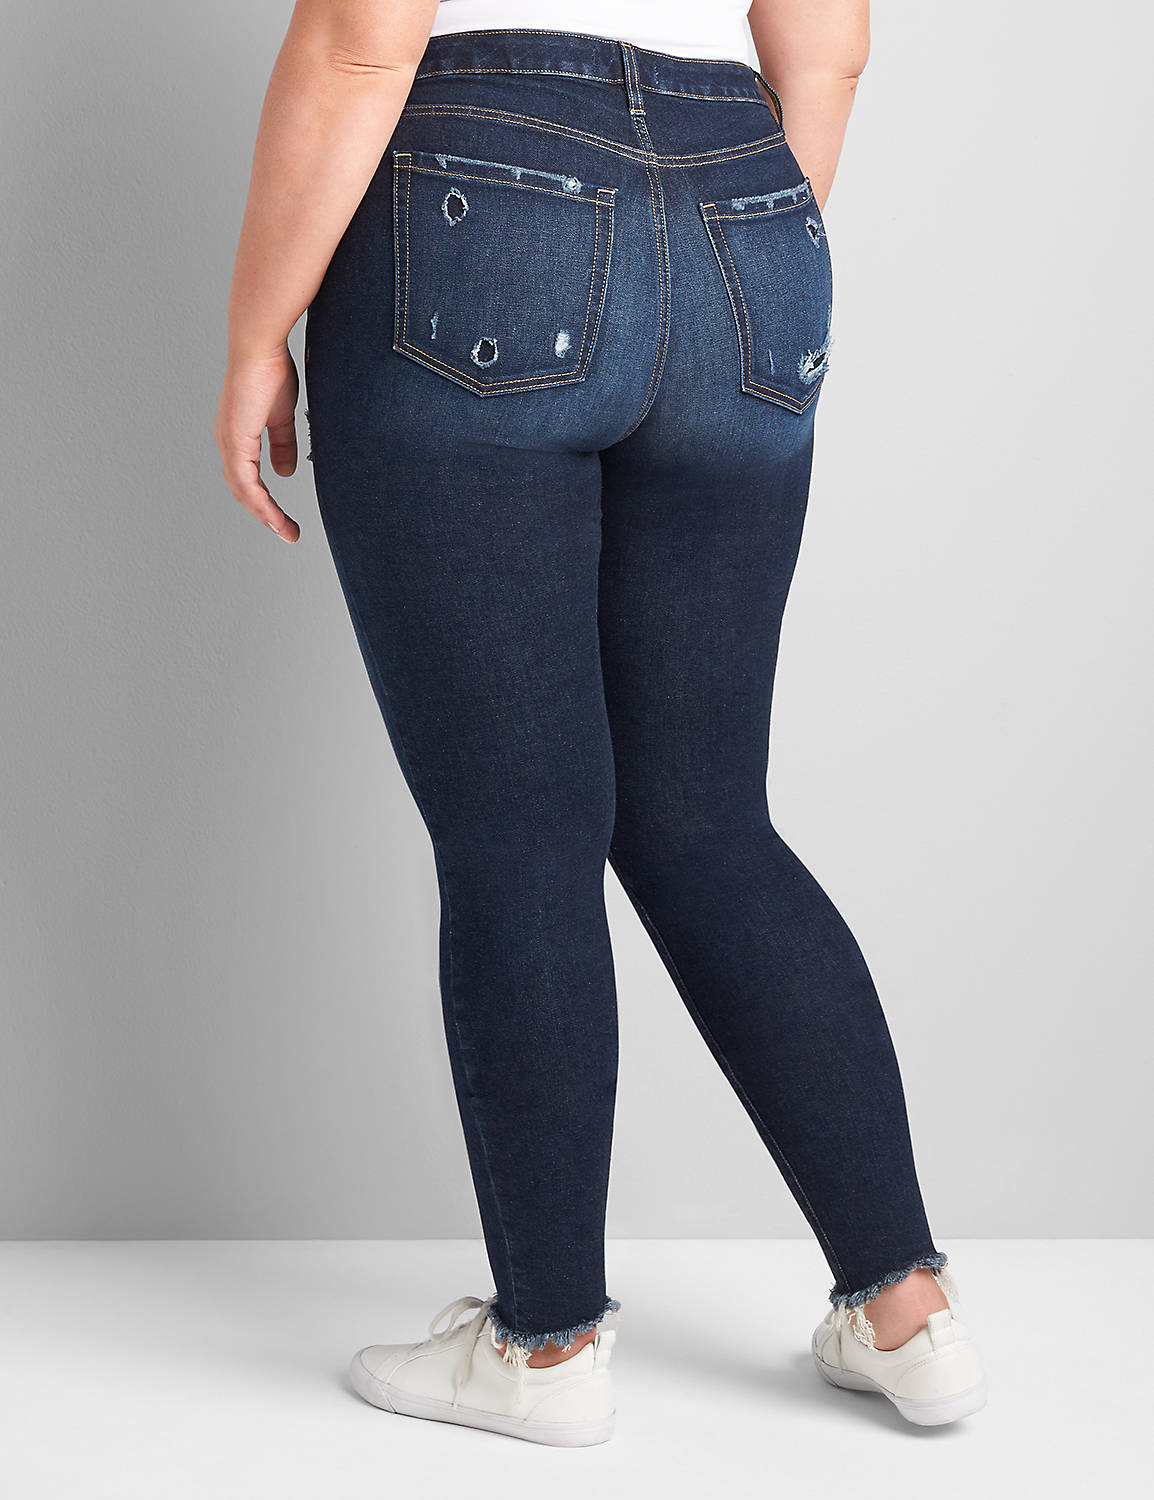 Signature Fit Skinny Jean Product Image 2